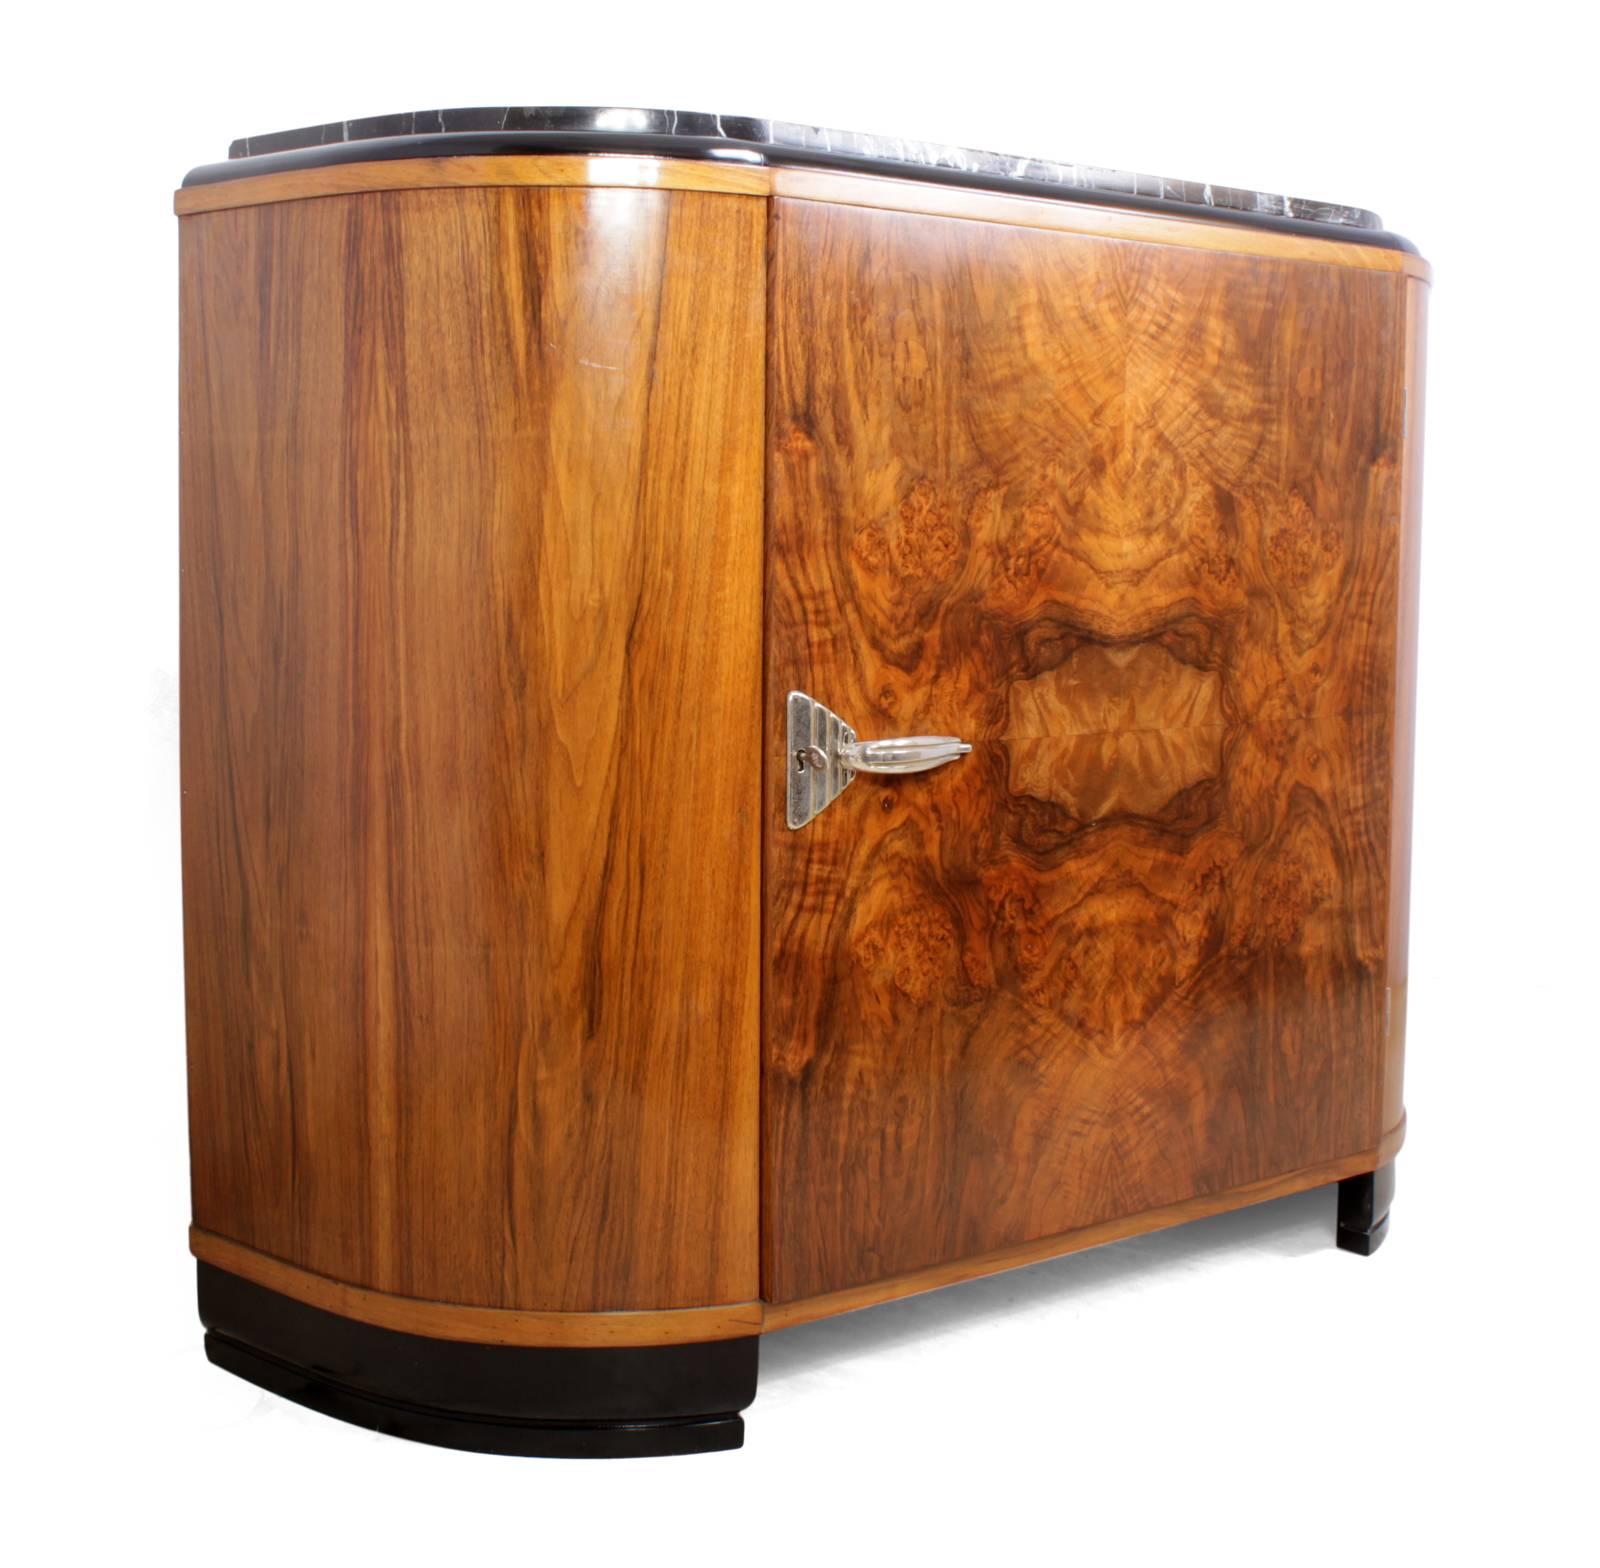 Art Deco sideboard with marble top
A rounded end walnut cabinet produced in France in the 1930s, this has one single door with chromed handle and lock, one key supplied, the marble top is black with white veins and compliments the piece very well,